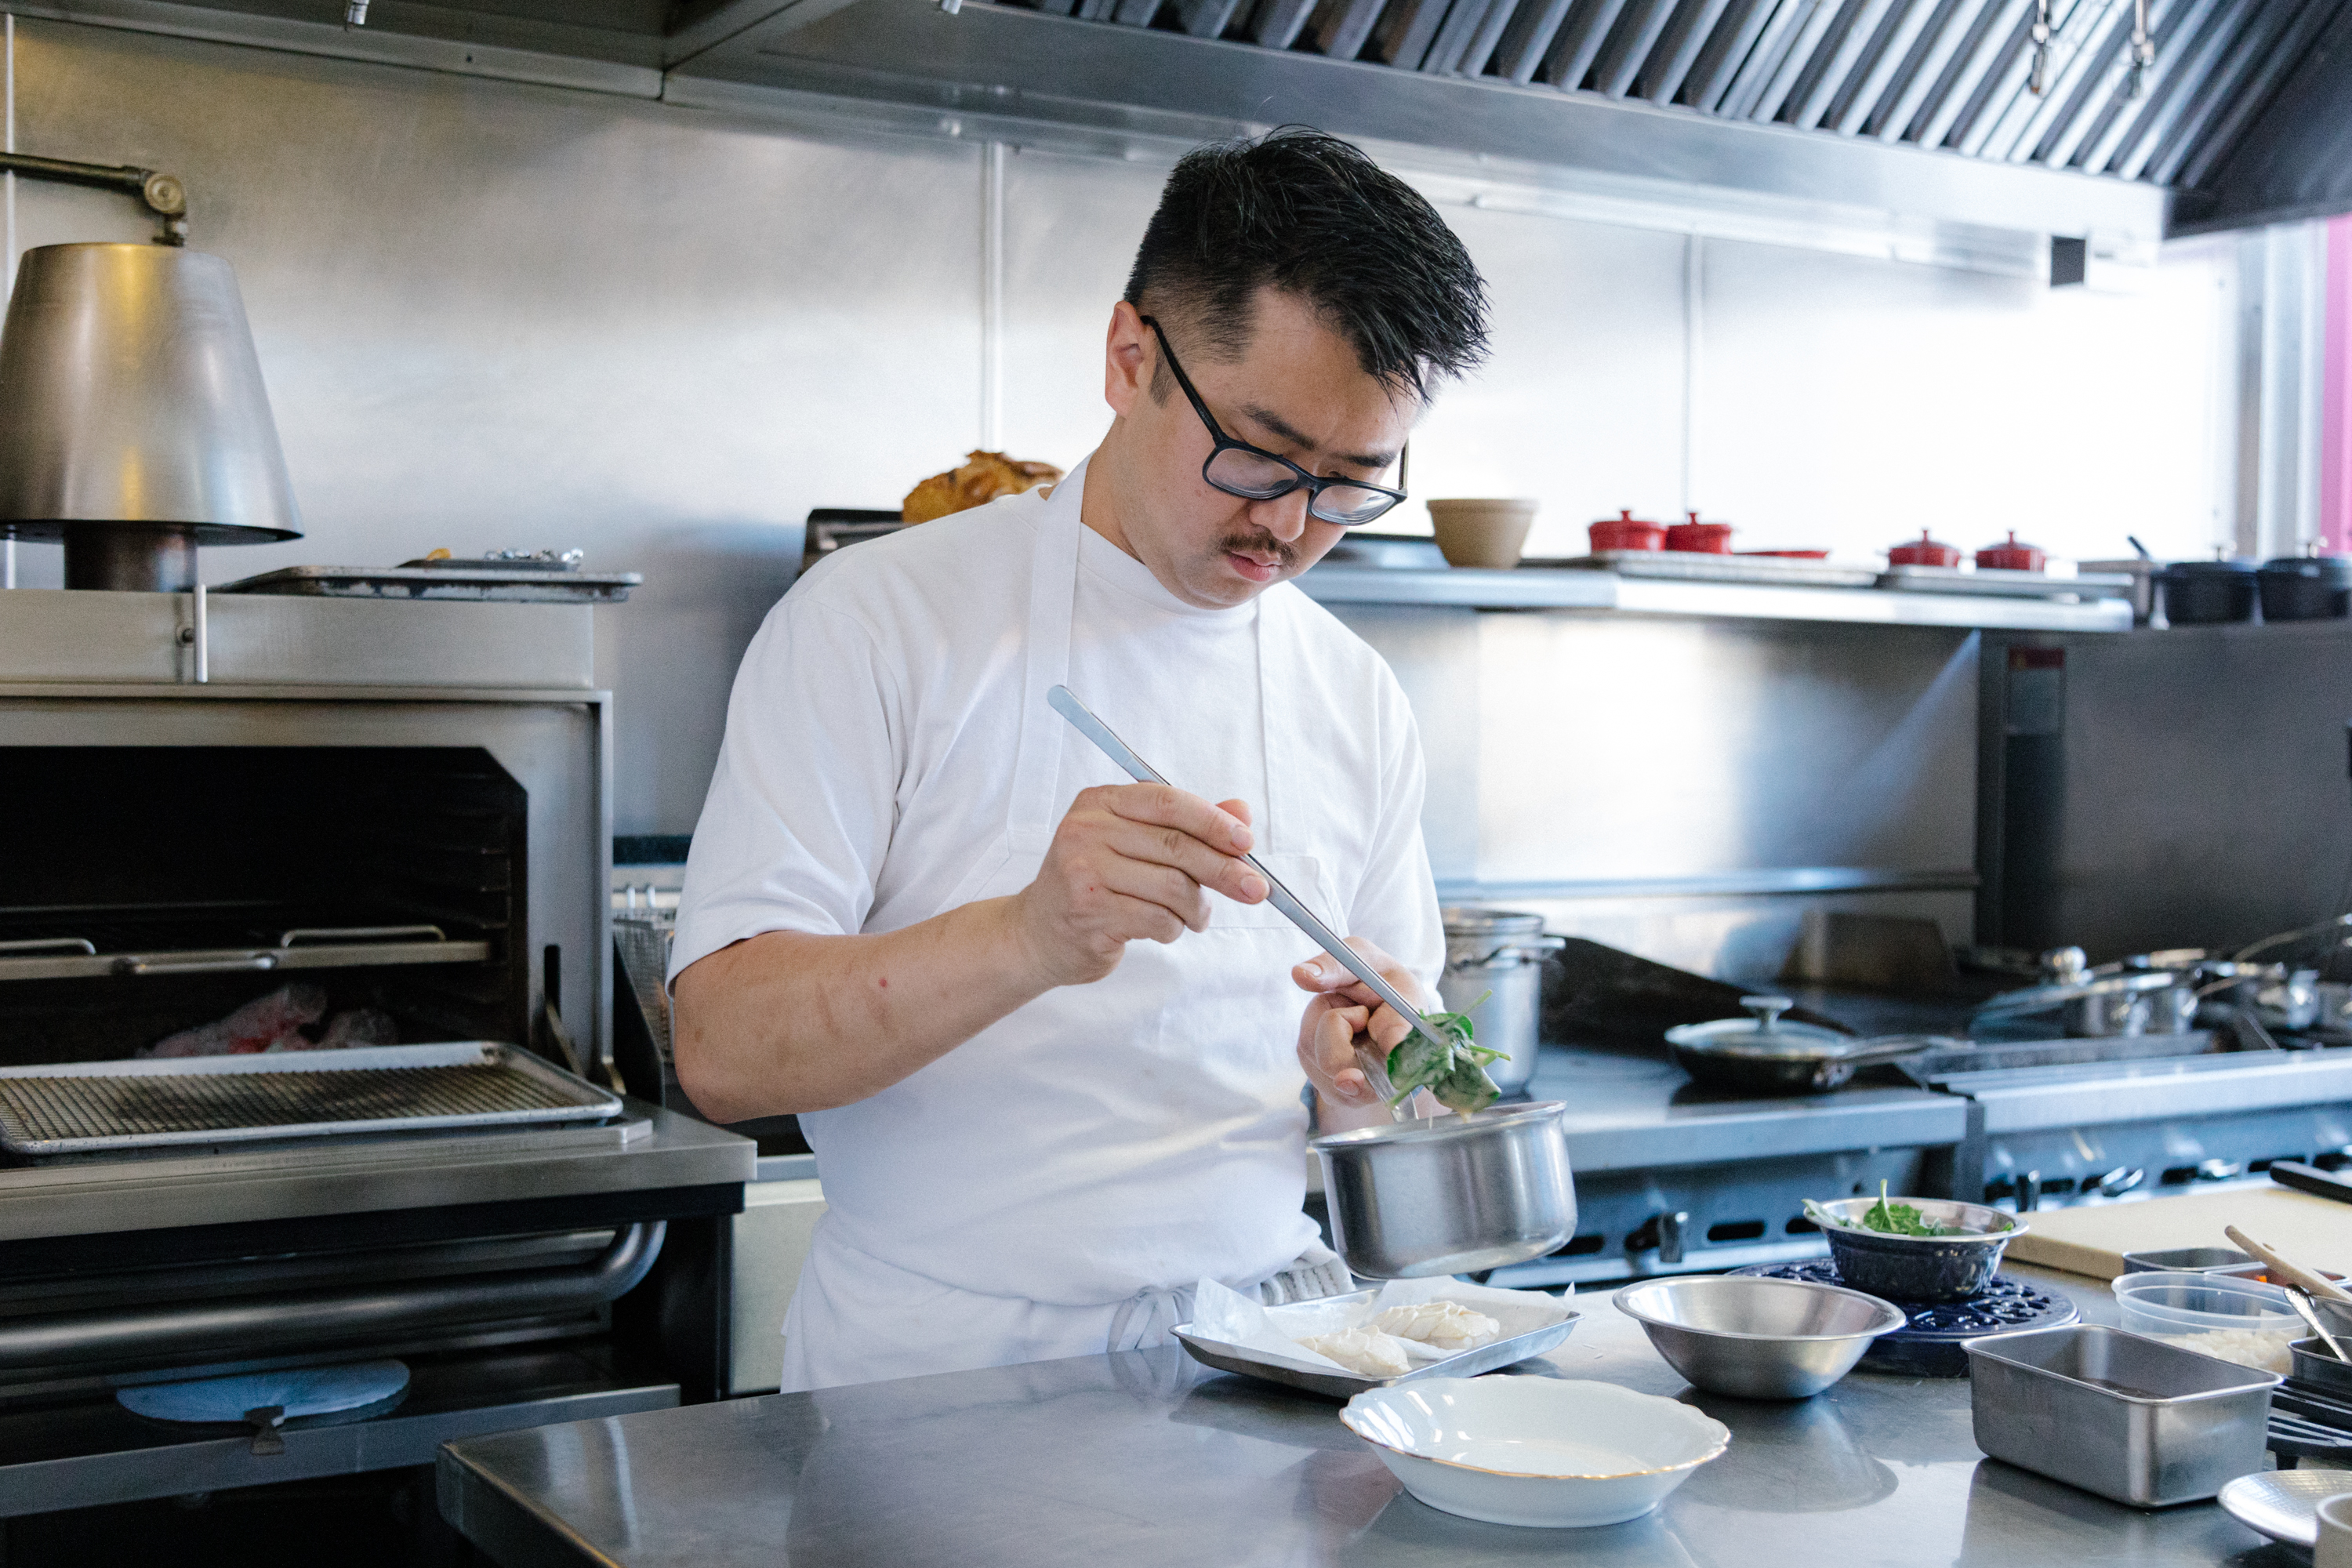 Chef Nathan Matkowsky cooks a dish in the kitchen of San Francisco restaurant Lord Stanley.